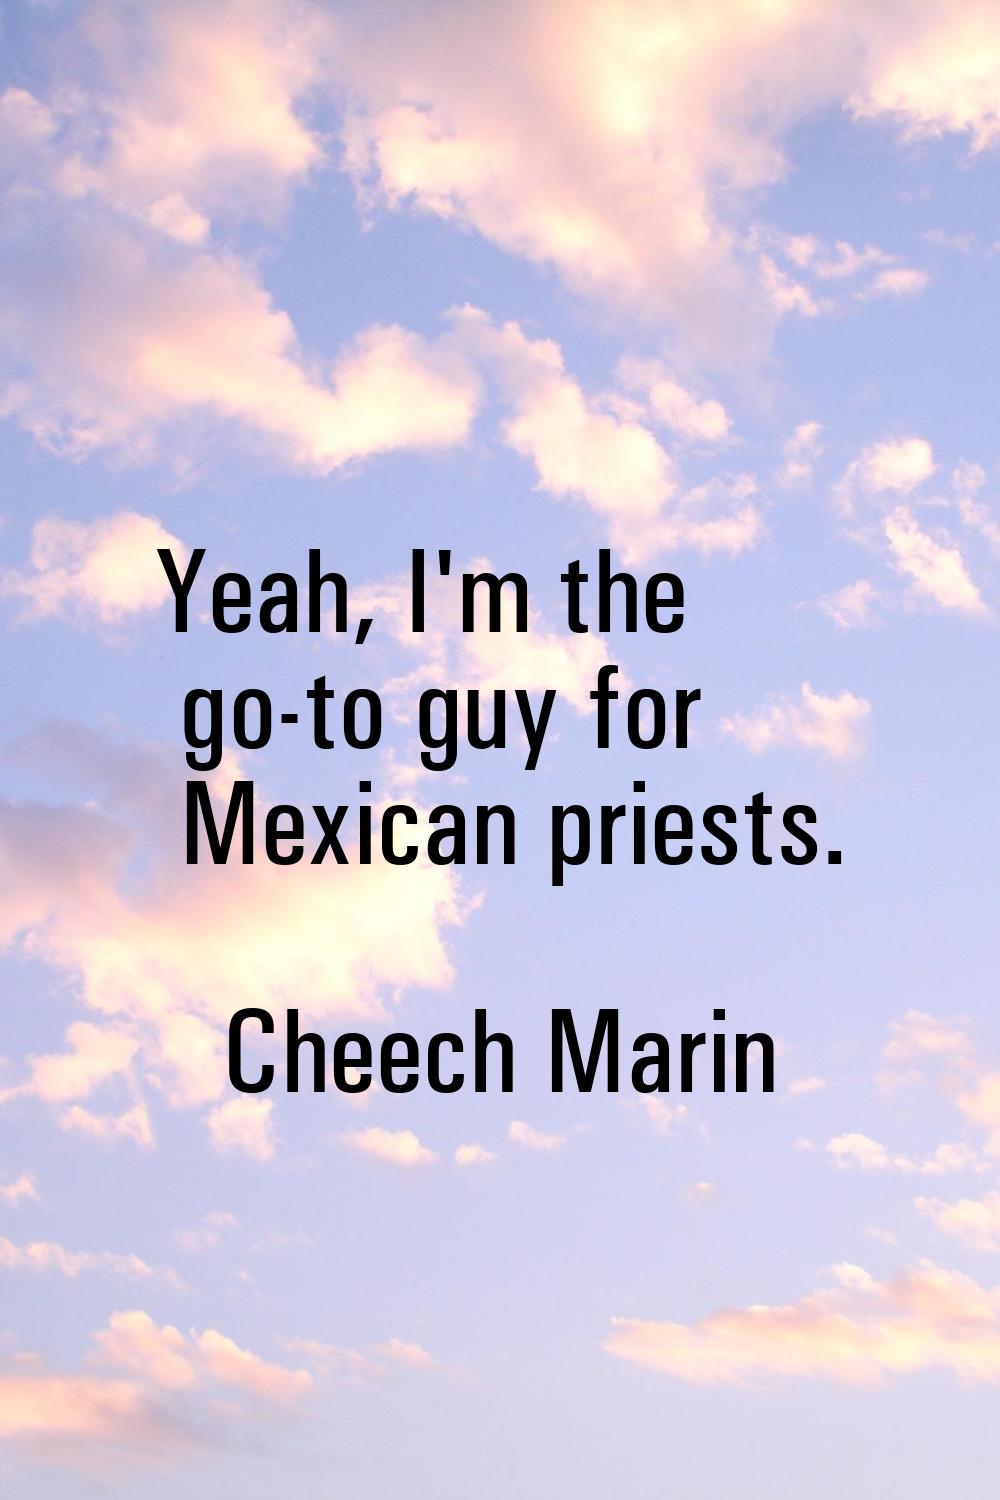 Yeah, I'm the go-to guy for Mexican priests.